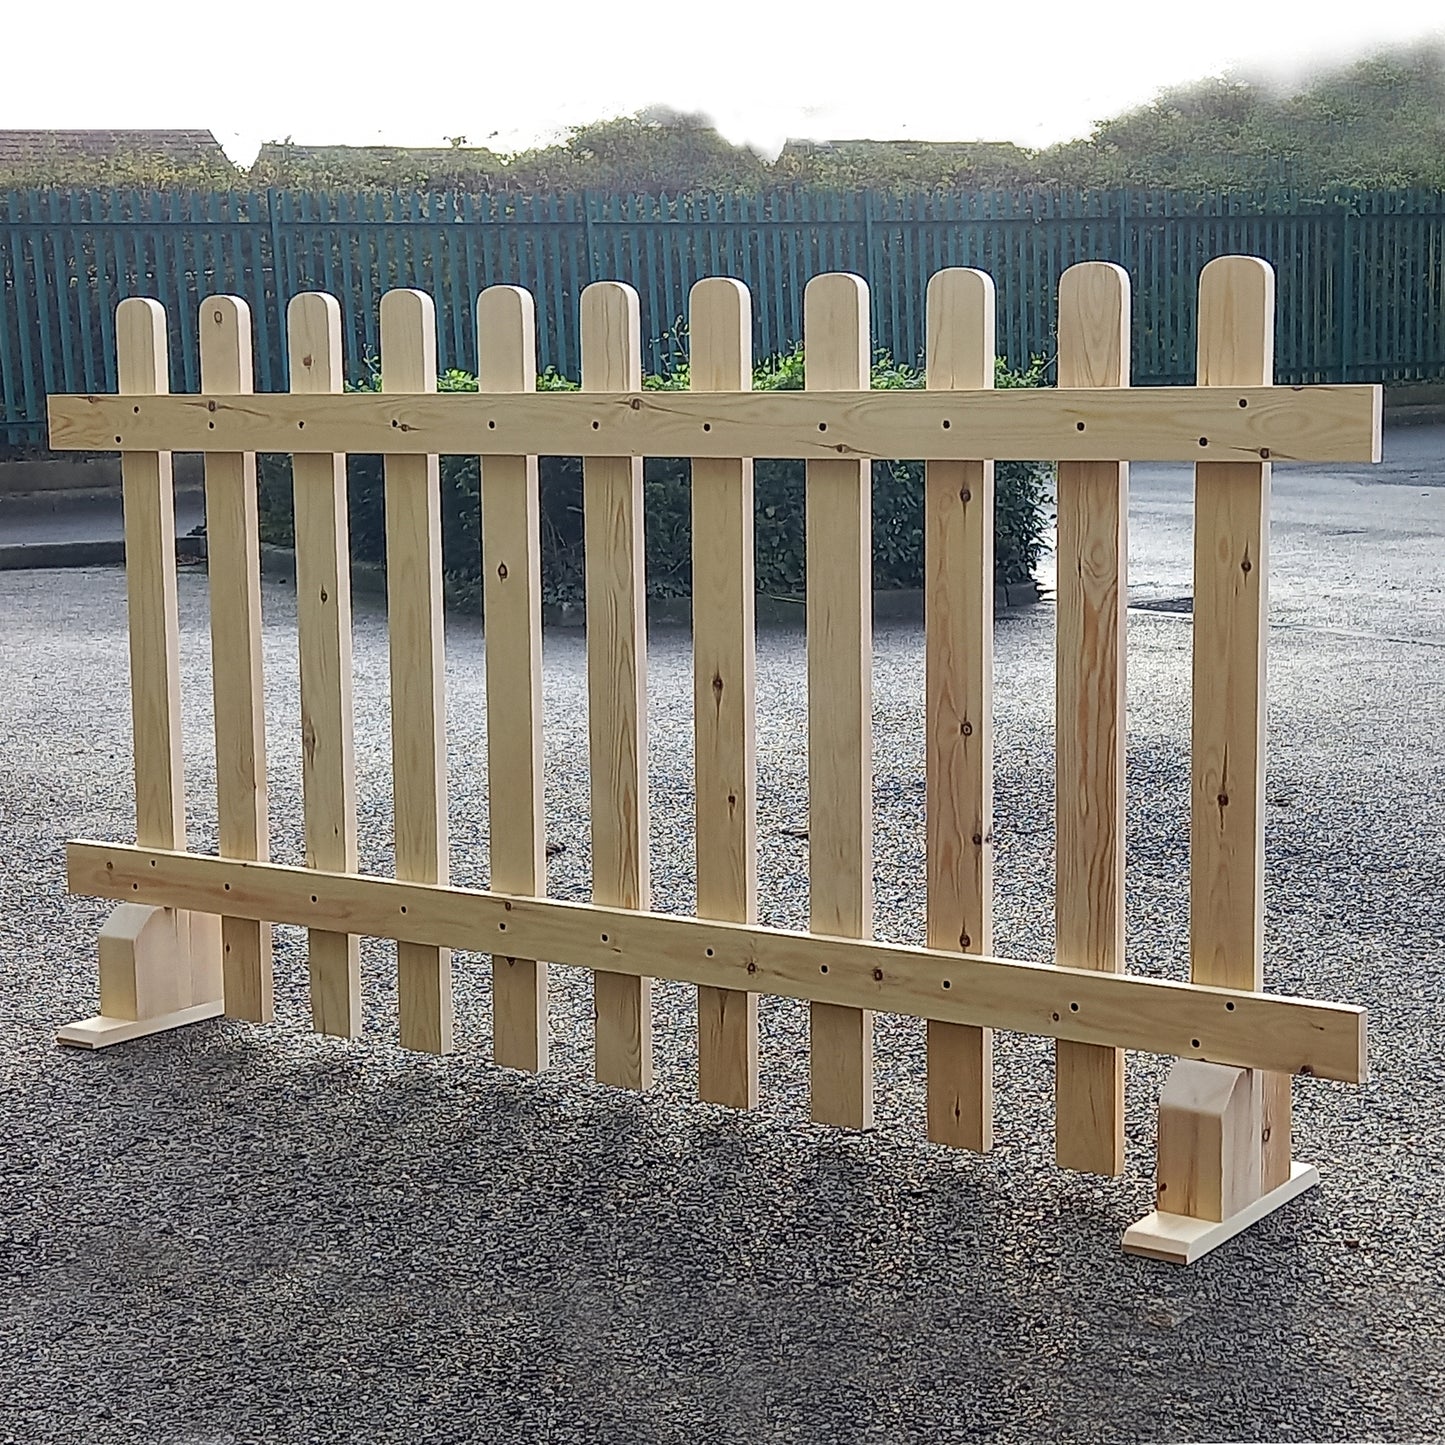 Freestanding Event Picket Fencing - Available in White, Natural & Coloured finishes